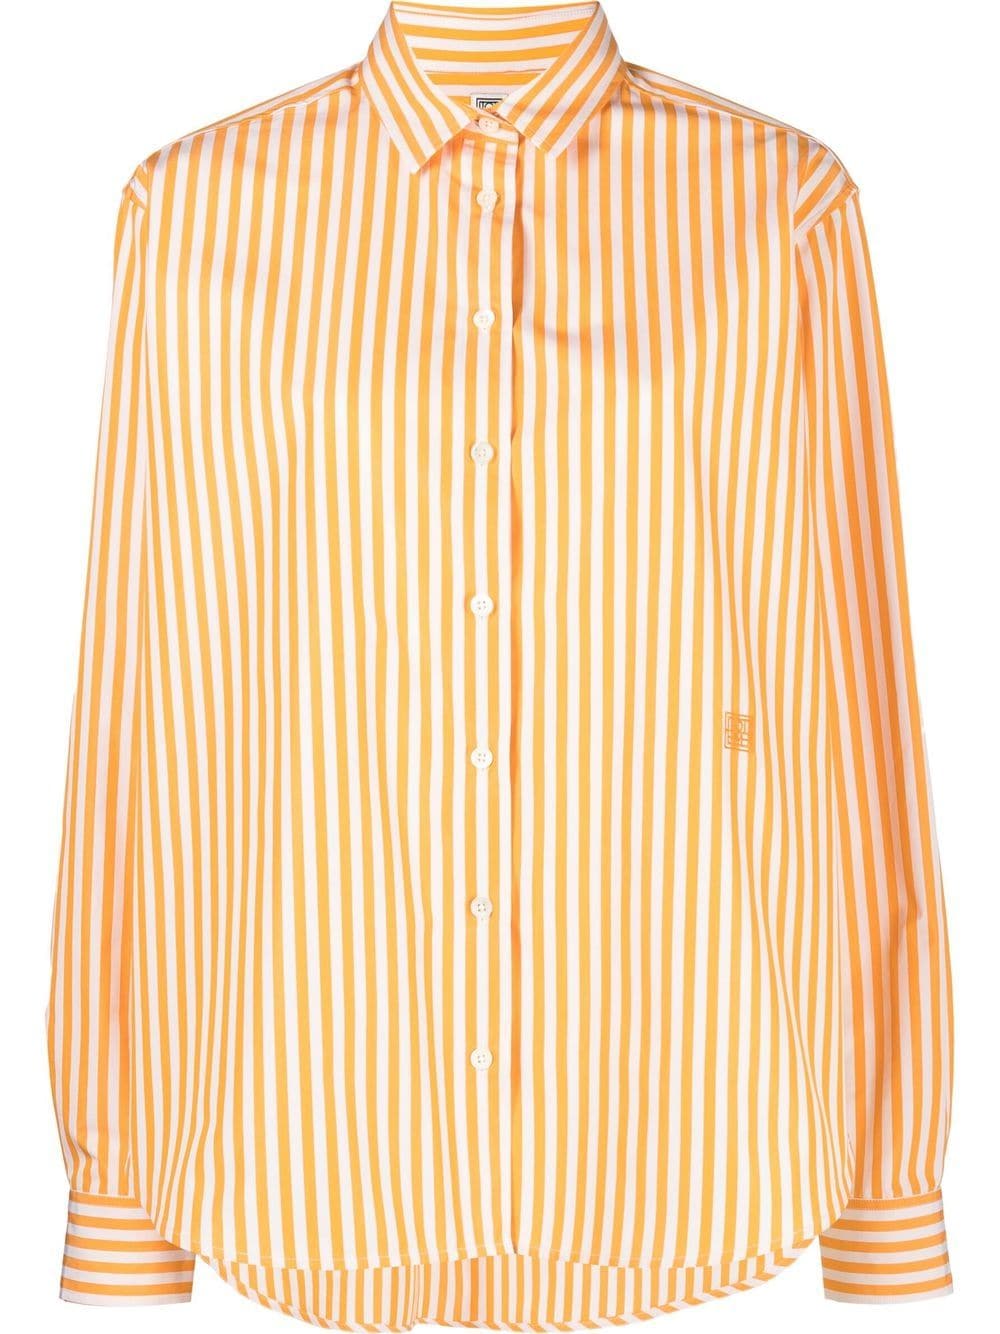 TOTEME Striped relaxed-fit Shirt - Farfetch